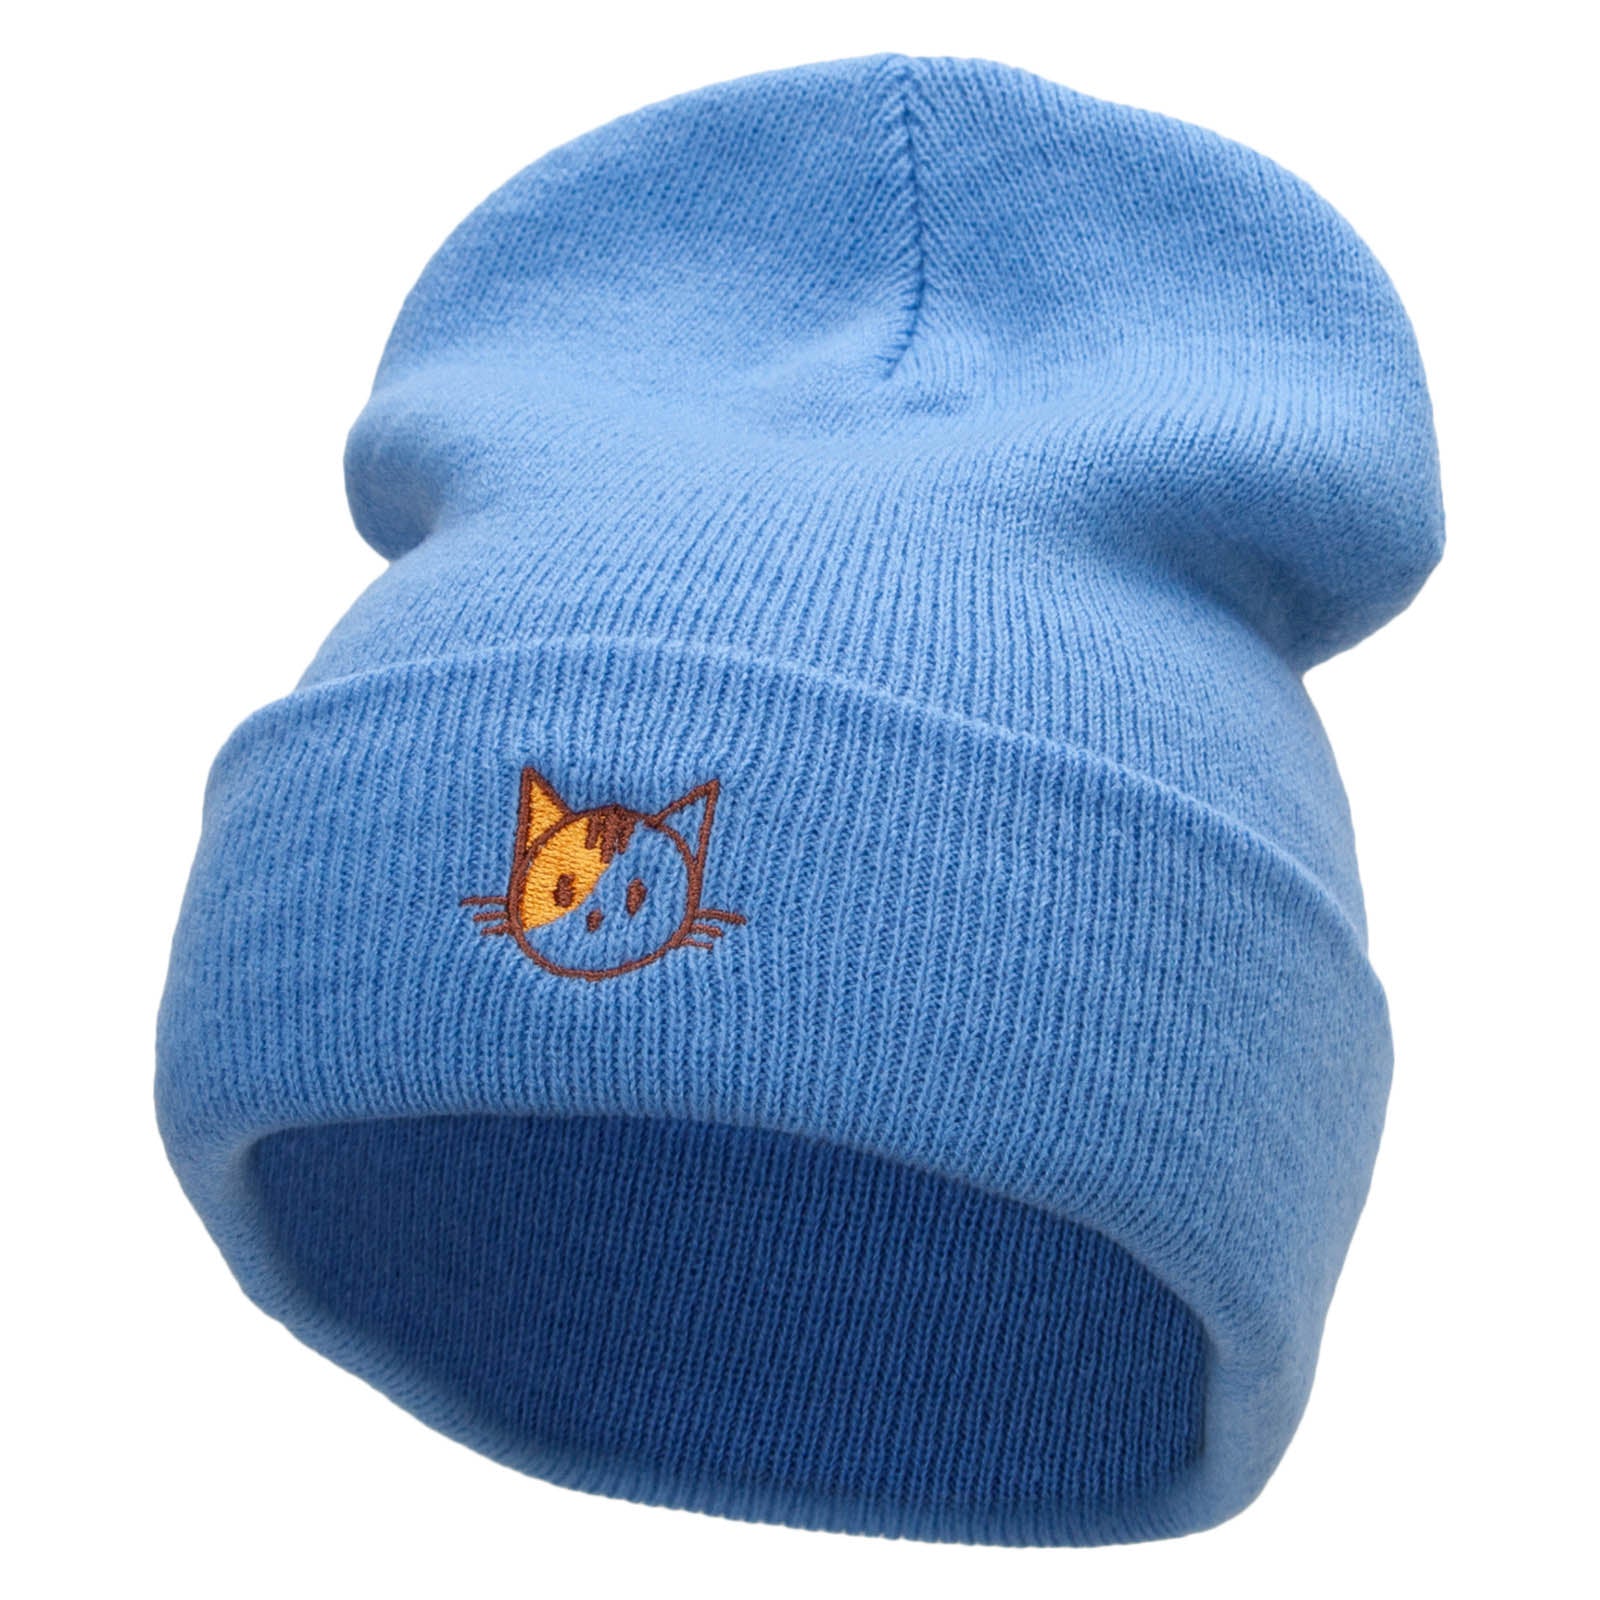 Spotted Cat Embroidered 12 Inch Long Knitted Beanie - Sky Blue OSFM